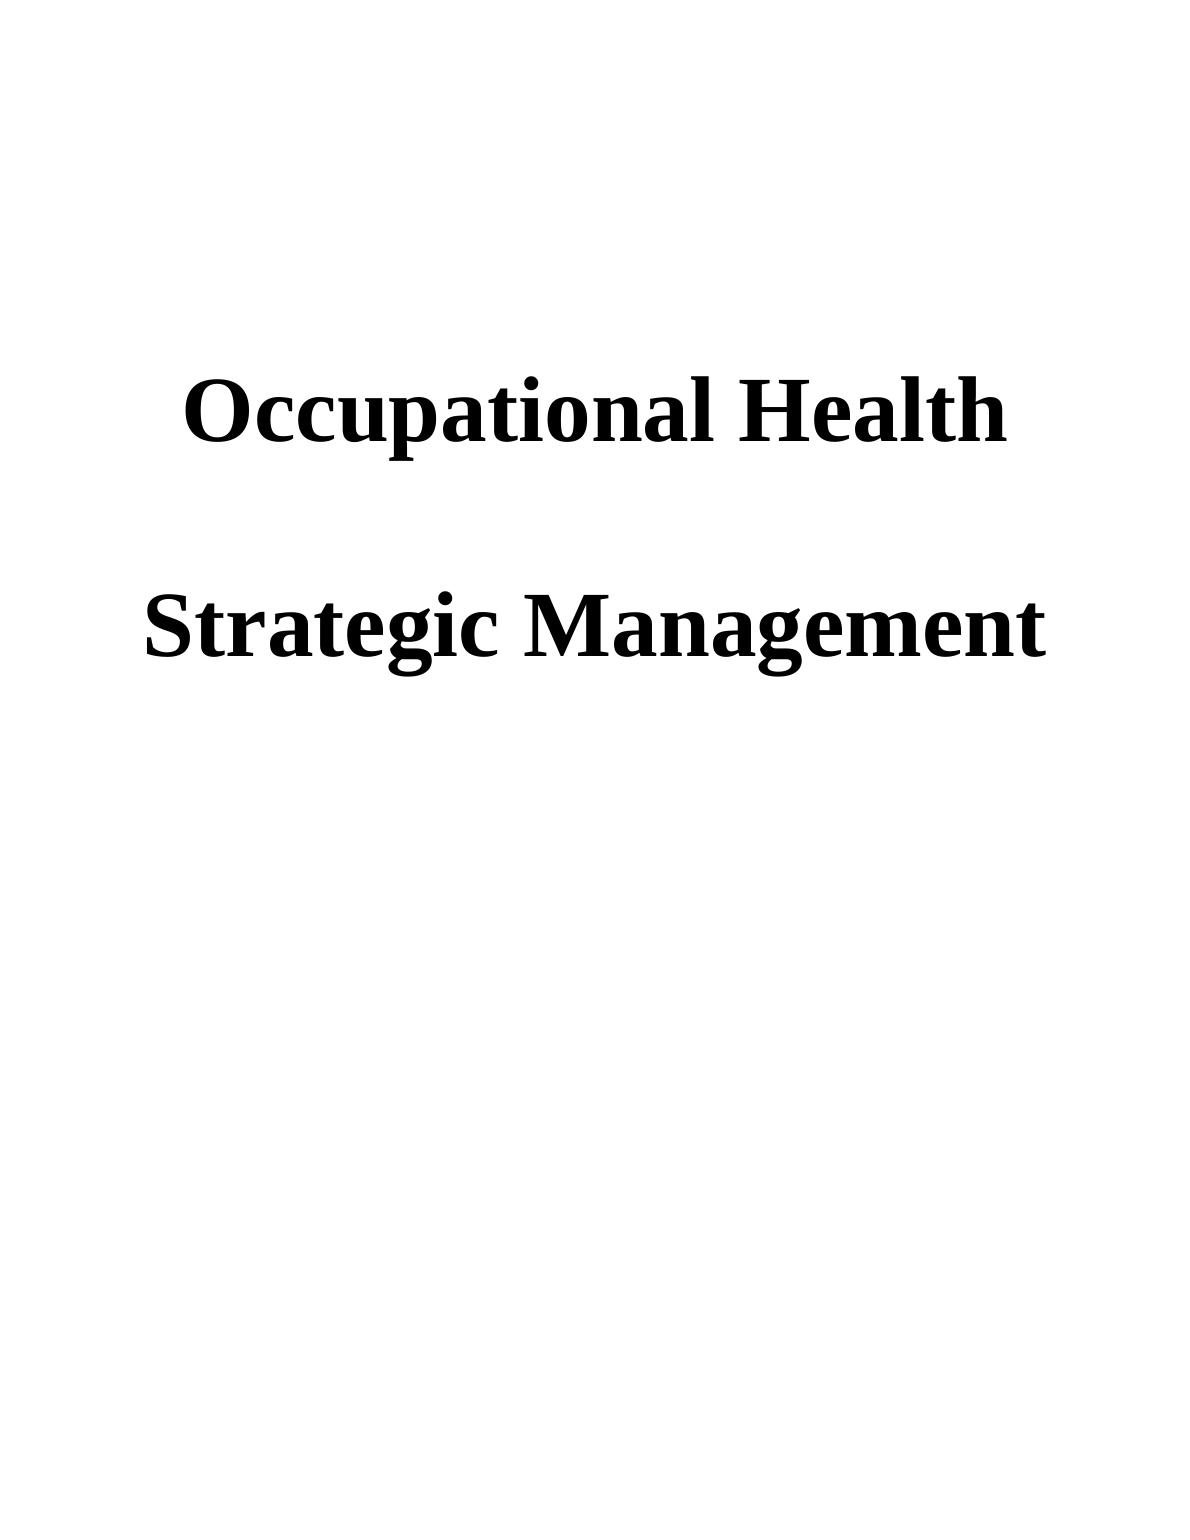 Evaluation of Occupational Health Intervention in Woolworths NZ_1